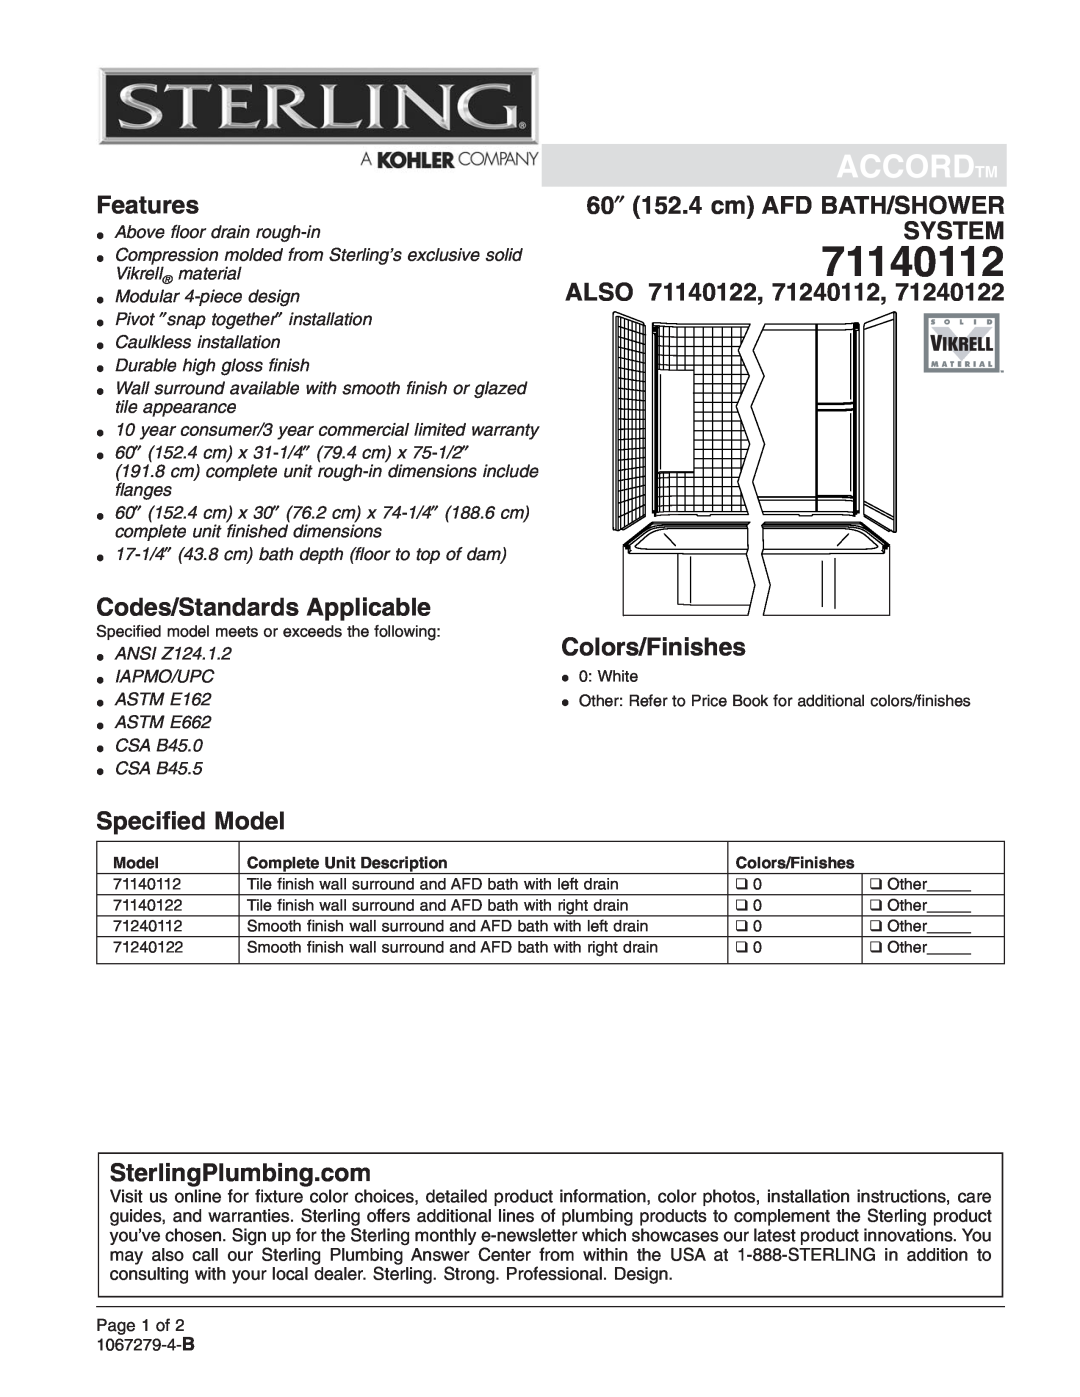 Sterling Plumbing 71240112 warranty Accordtm, Features, Codes/Standards Applicable, 60″ 152.4 cm AFD BATH/SHOWER SYSTEM 